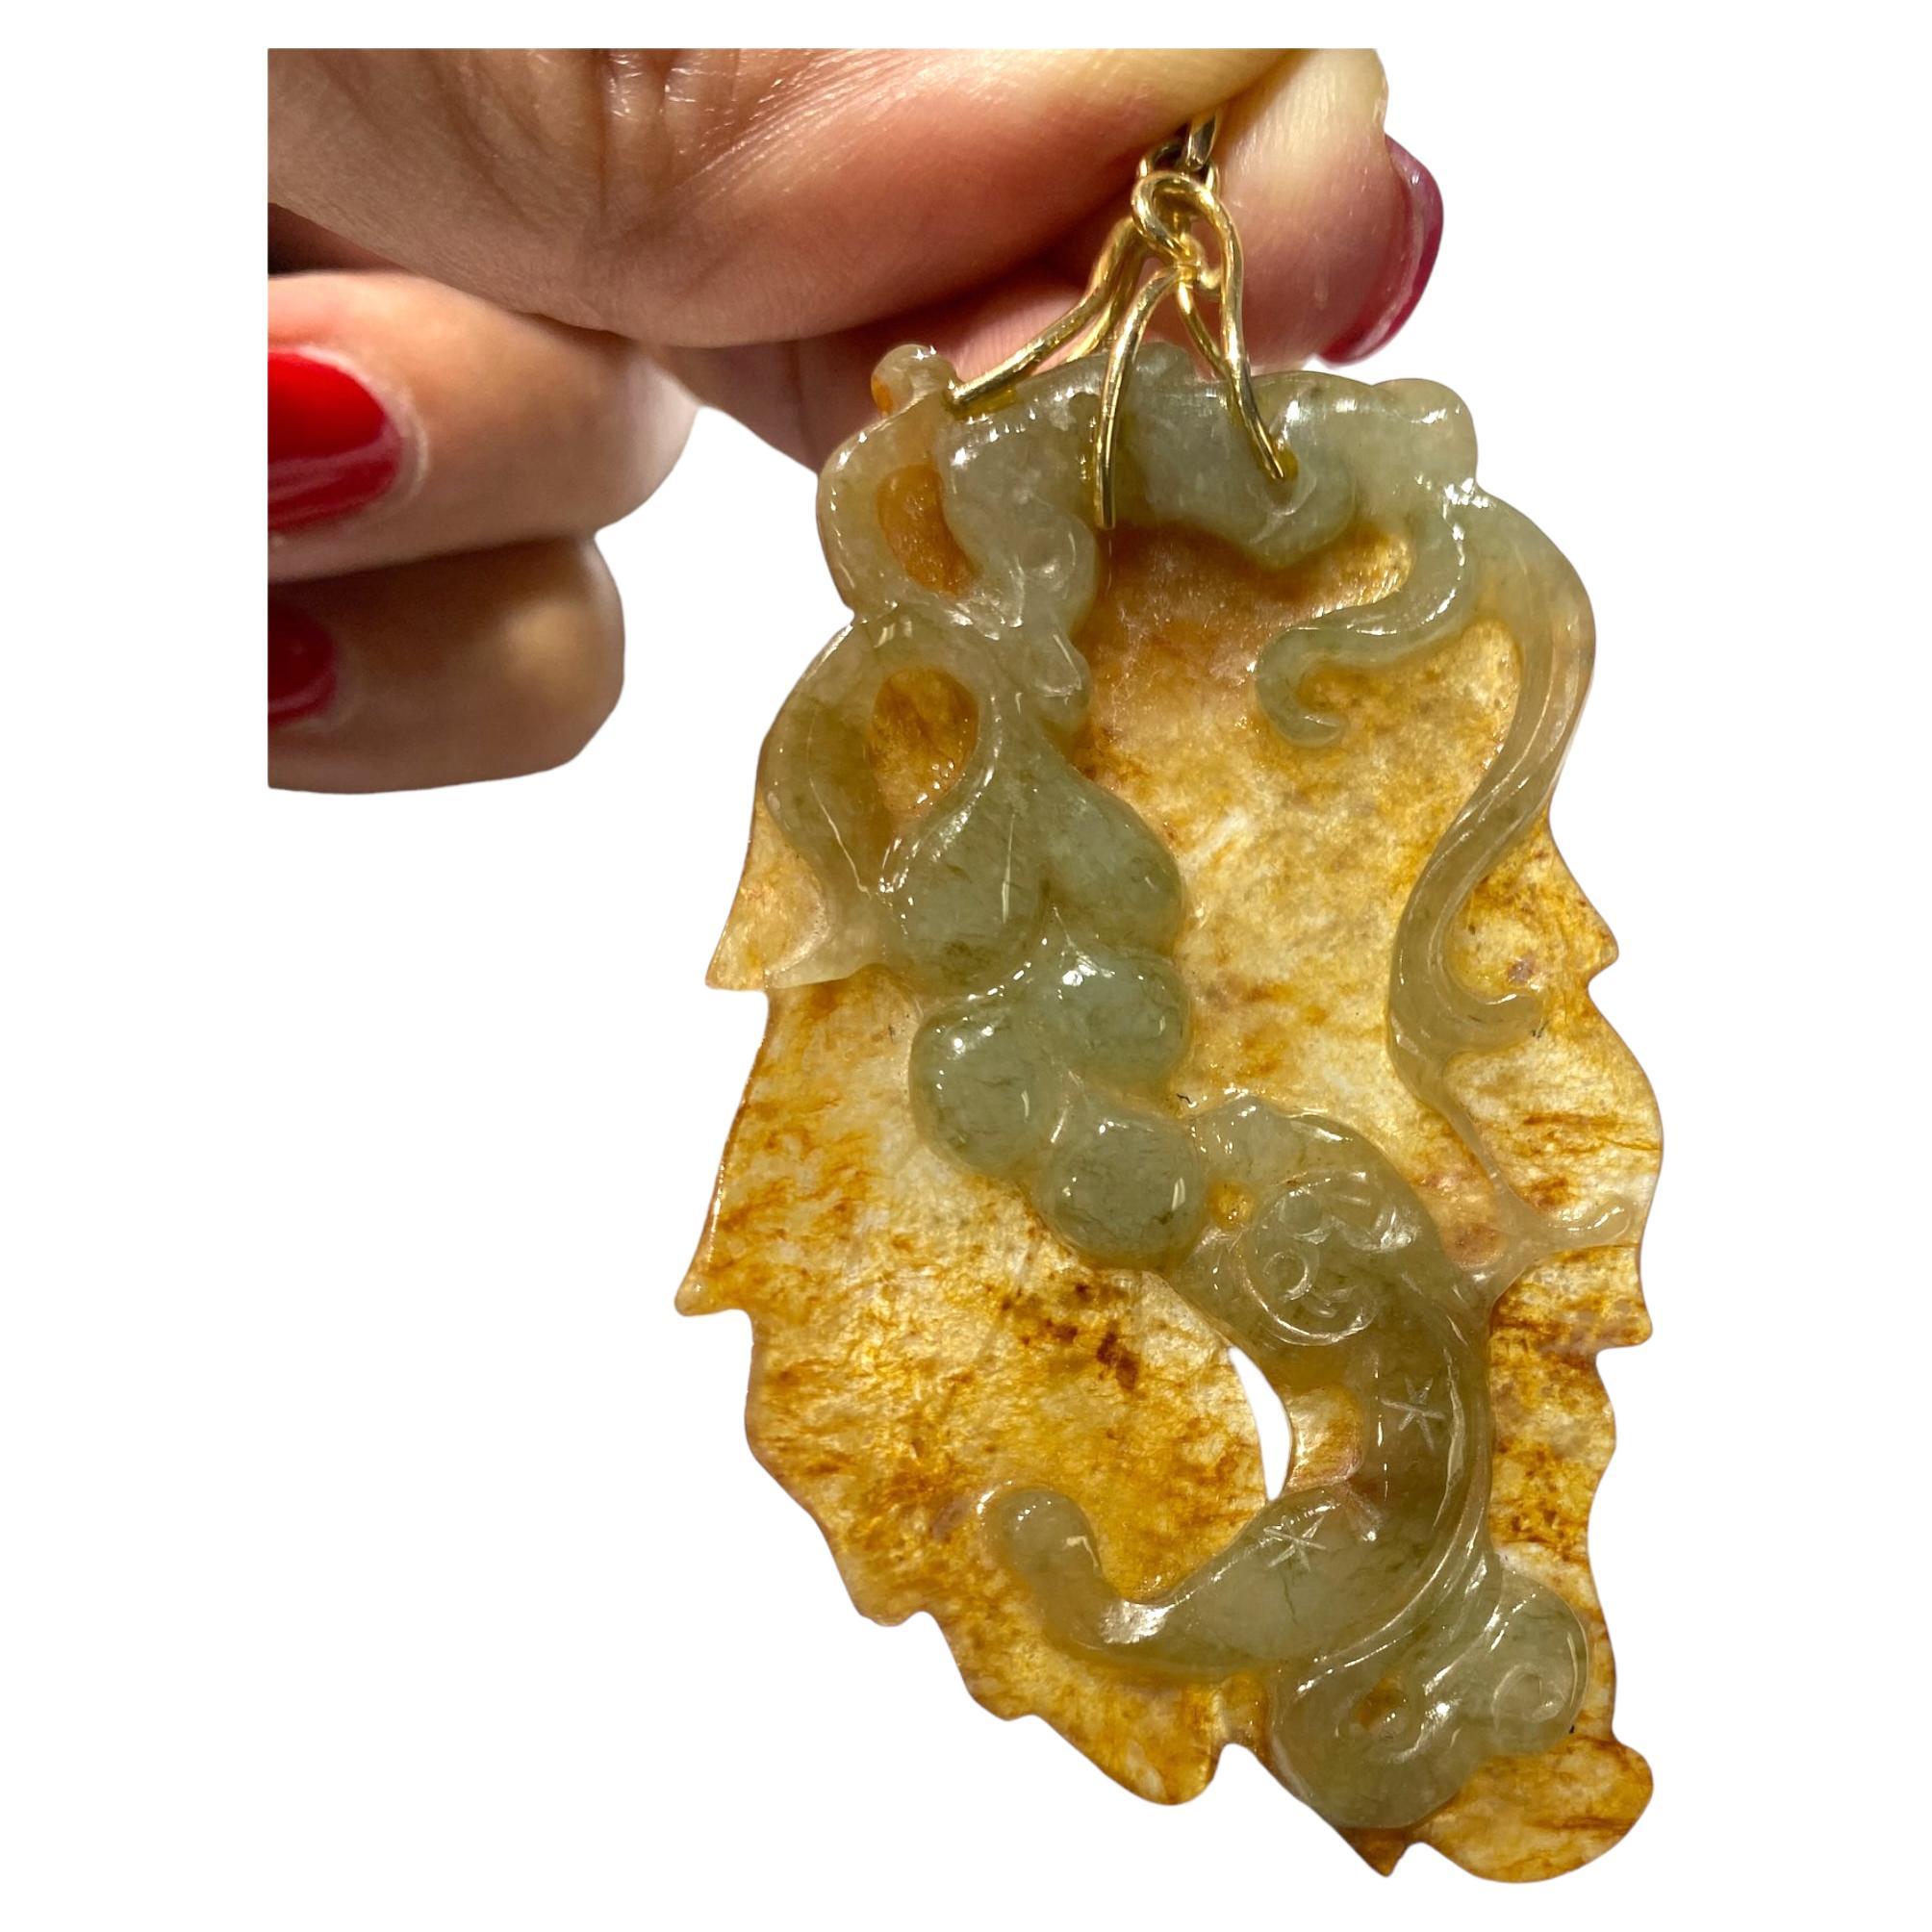 Translucent high-quality jade at its finest is exceptionally rare. The top carving of green jade depicts a salamander with a grapevine. The Brownish color jade is the grapevine and is highly translucent. The back side is the carving of the leaf